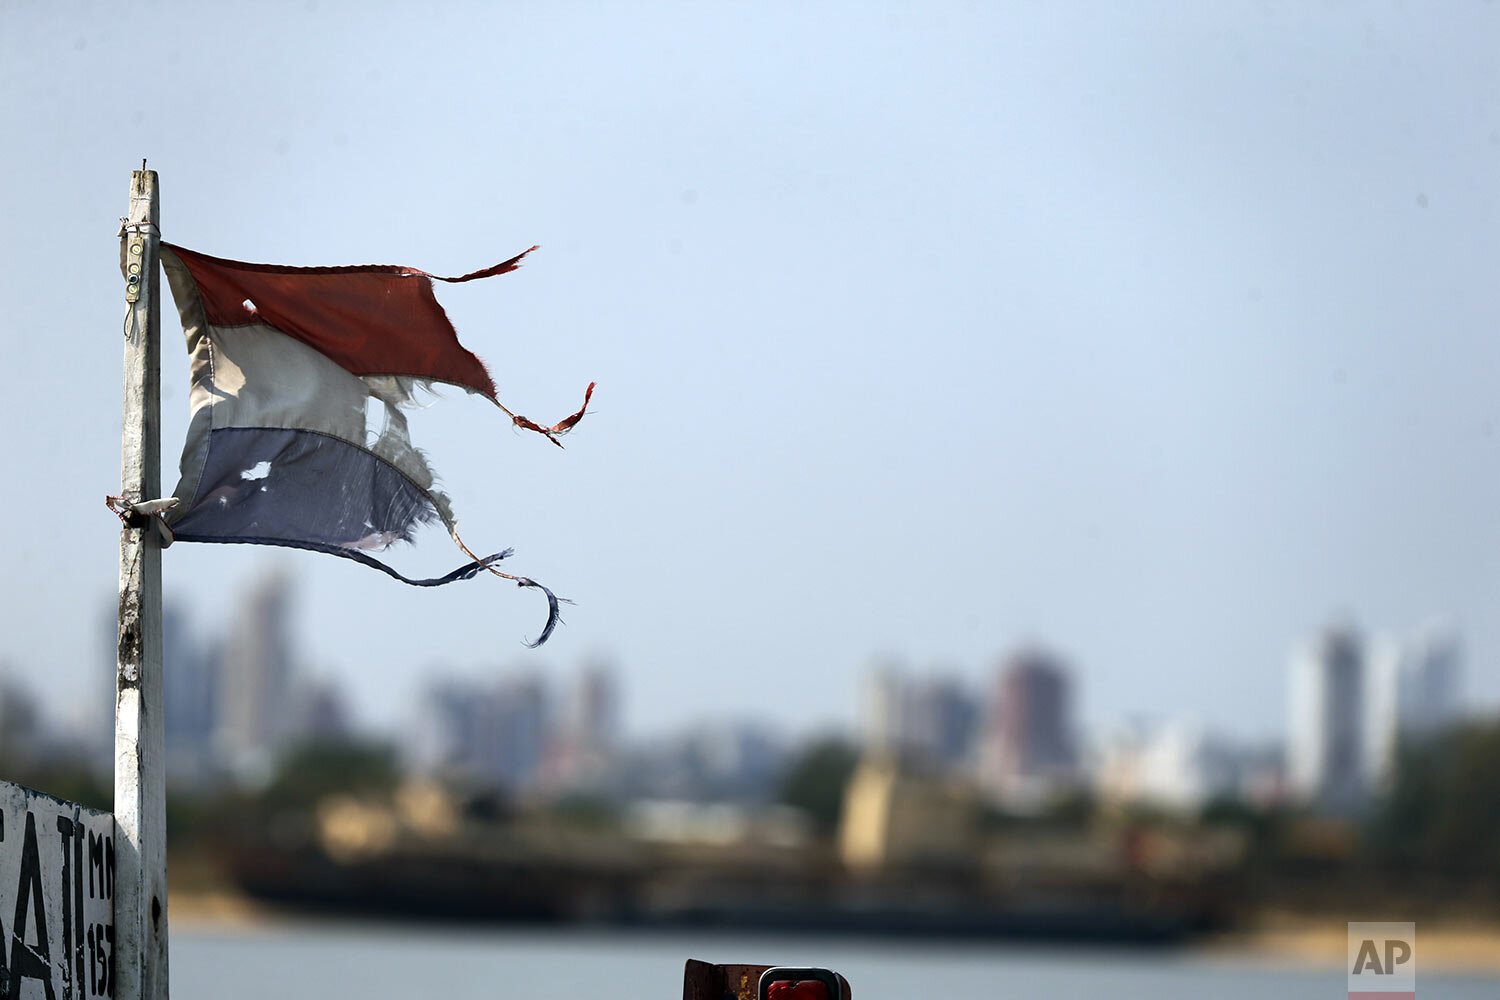  A worn Paraguayan flag flies across from the Chaco-i port where a barge sits on a dry bank in Asuncion, Paraguay, Thursday, Oct. 8, 2020. (AP Photo/Jorge Saenz) 